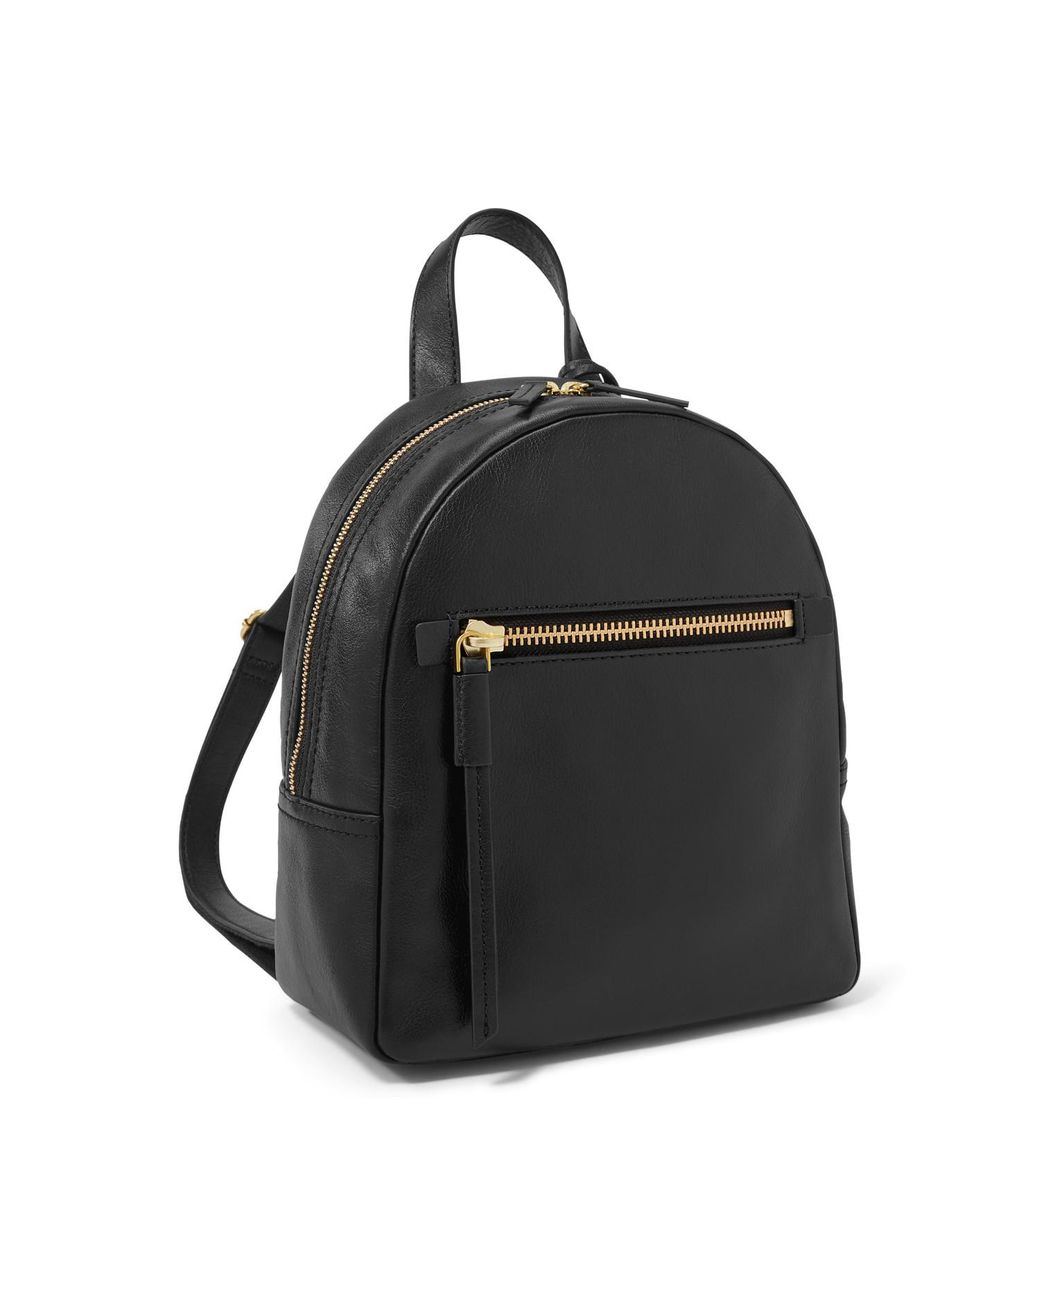 Fossil Megan Leather Backpack in Black | Lyst